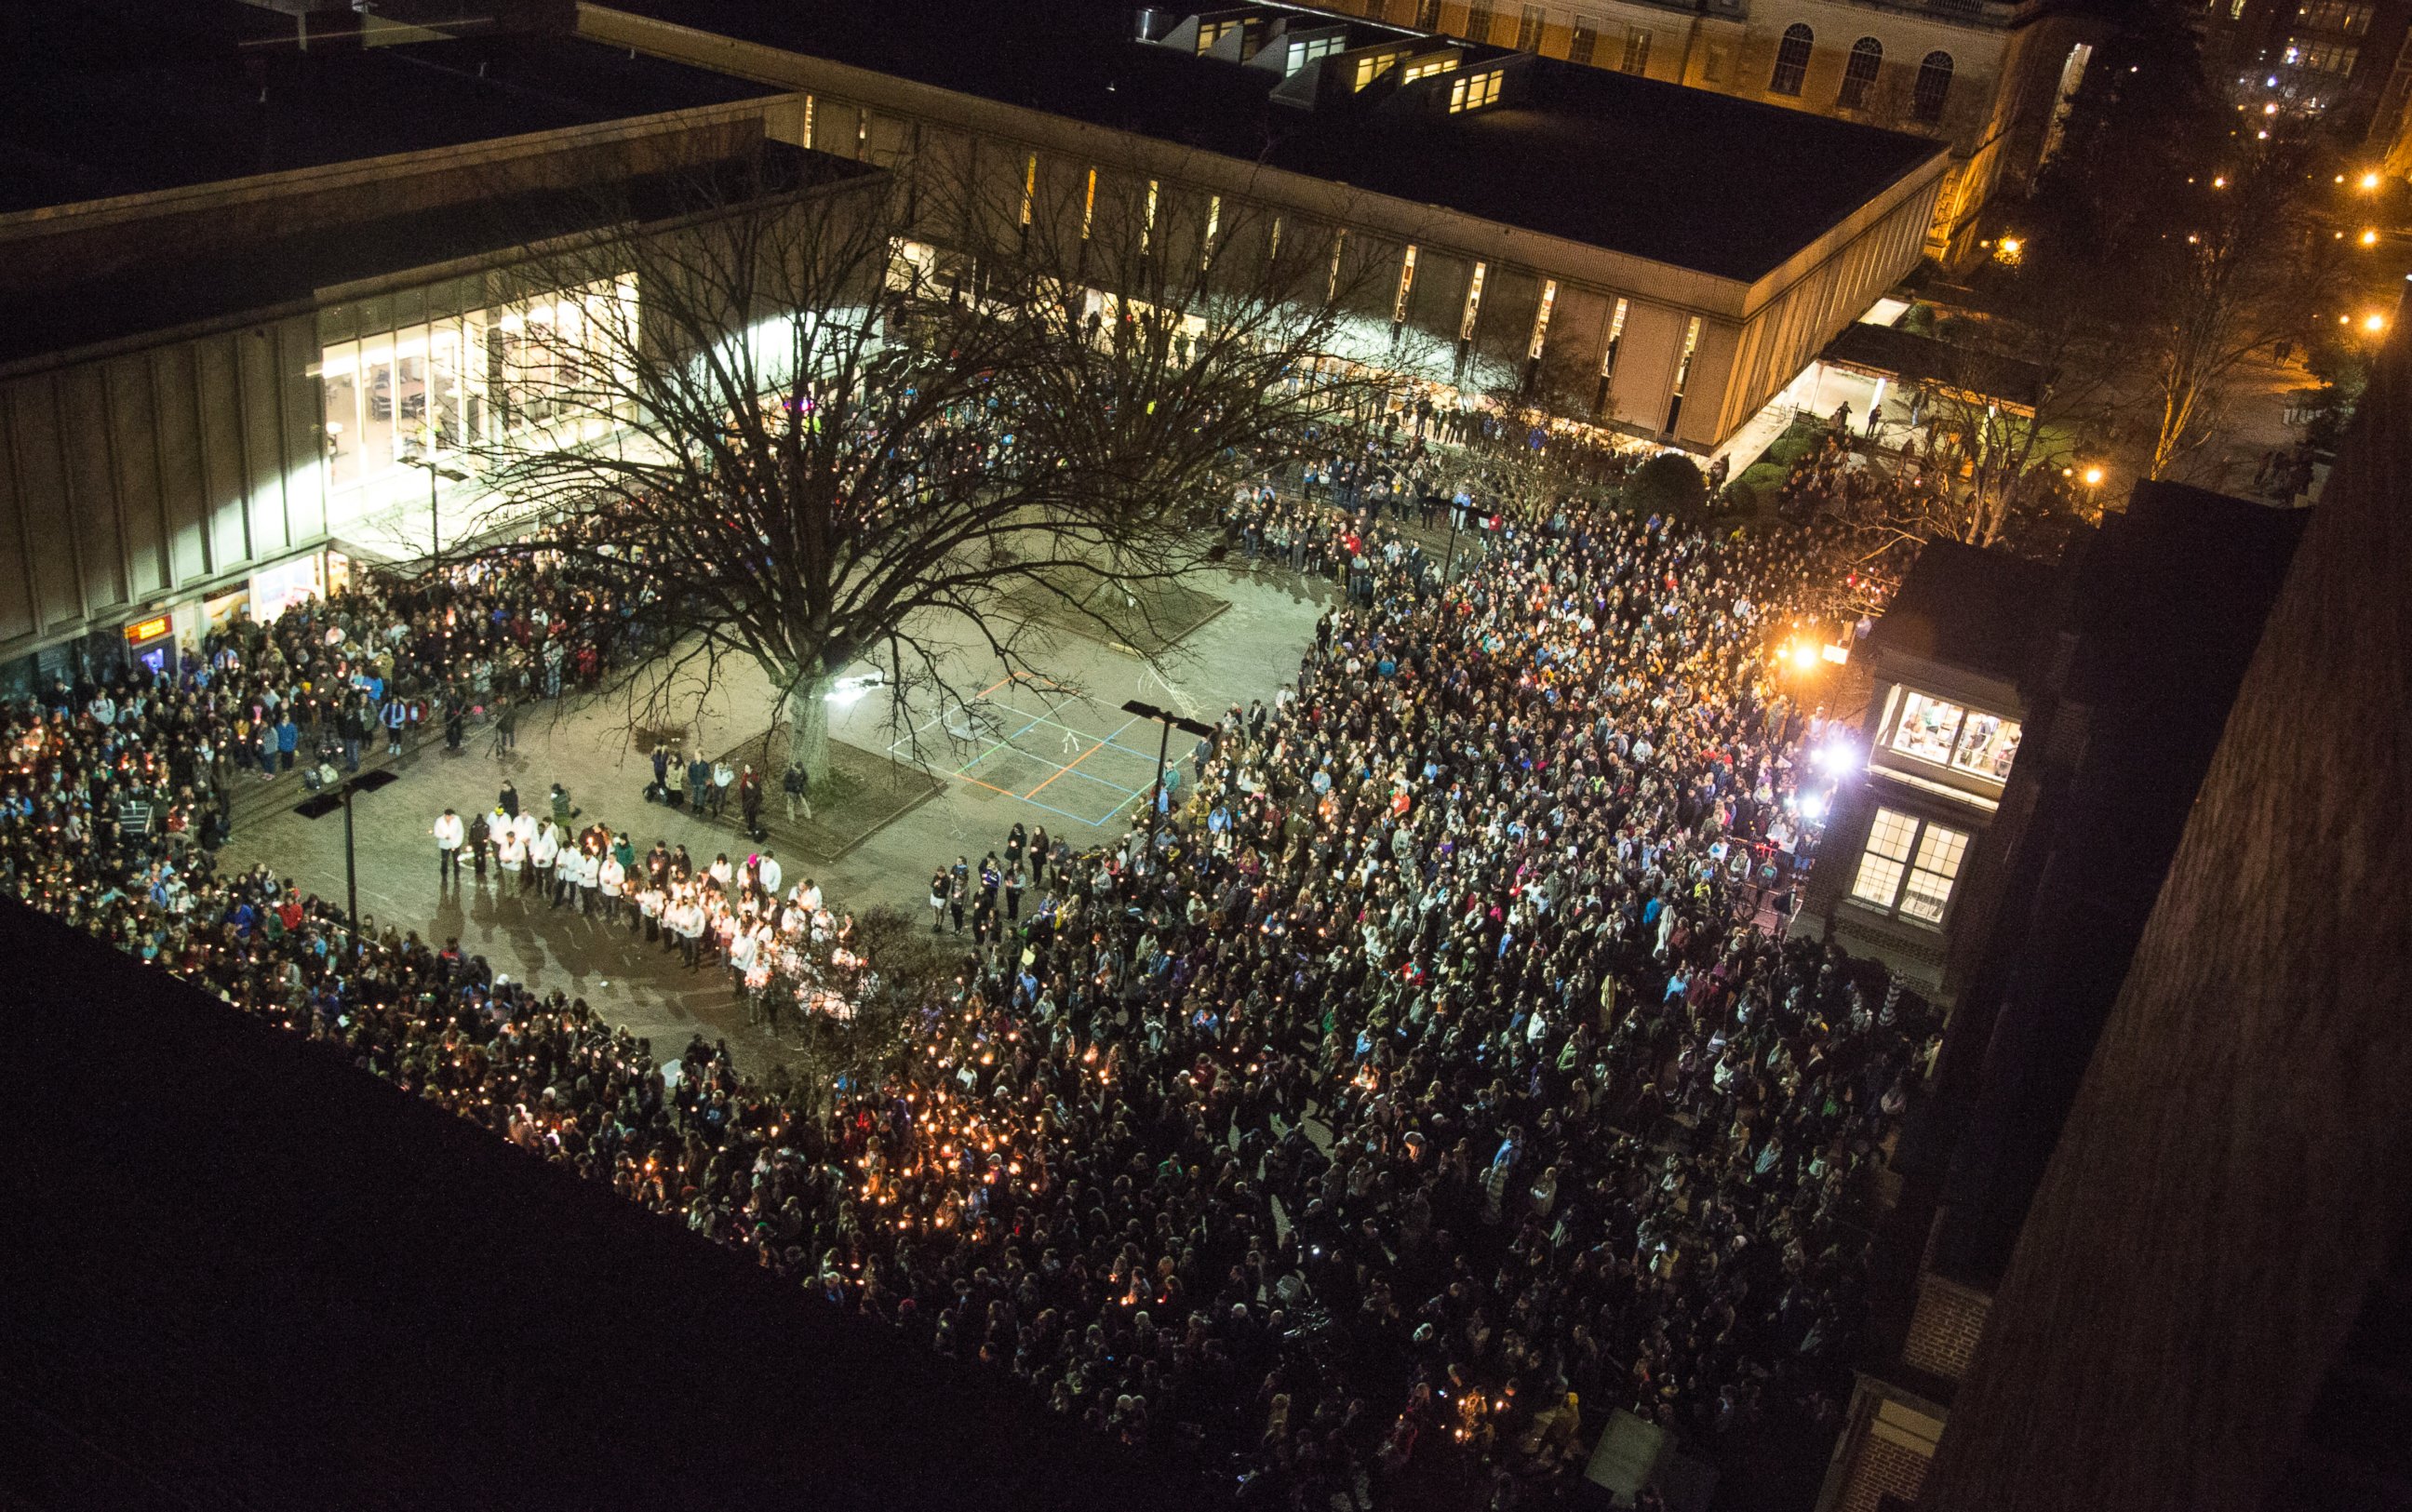 People gather at UNC-Chapel Hill's "Pit" to mourn for Deah Shaddy Barakat, his wife Yusor Mohammed and her sister Razan Mohammed Abu-Salha in Chapel Hill, N.C., Wednesday, Feb. 11, 2015. Craig Stephen Hicks is accused of killing the three on Tuesday.